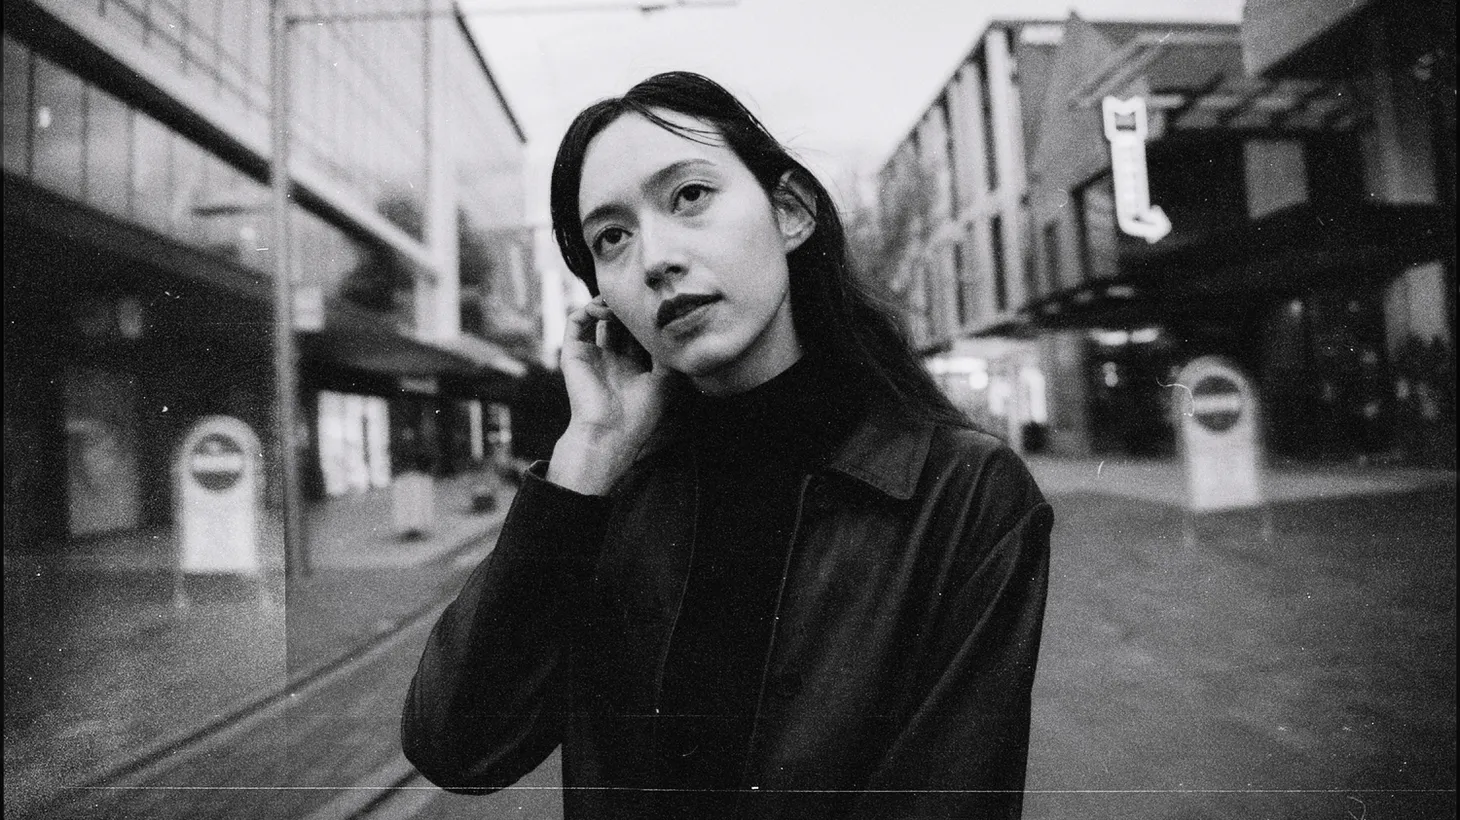 Late last year, New Zealand multi-instrumental producer Fazerdaze released the EP Break!, her first output since her 2017 debut.